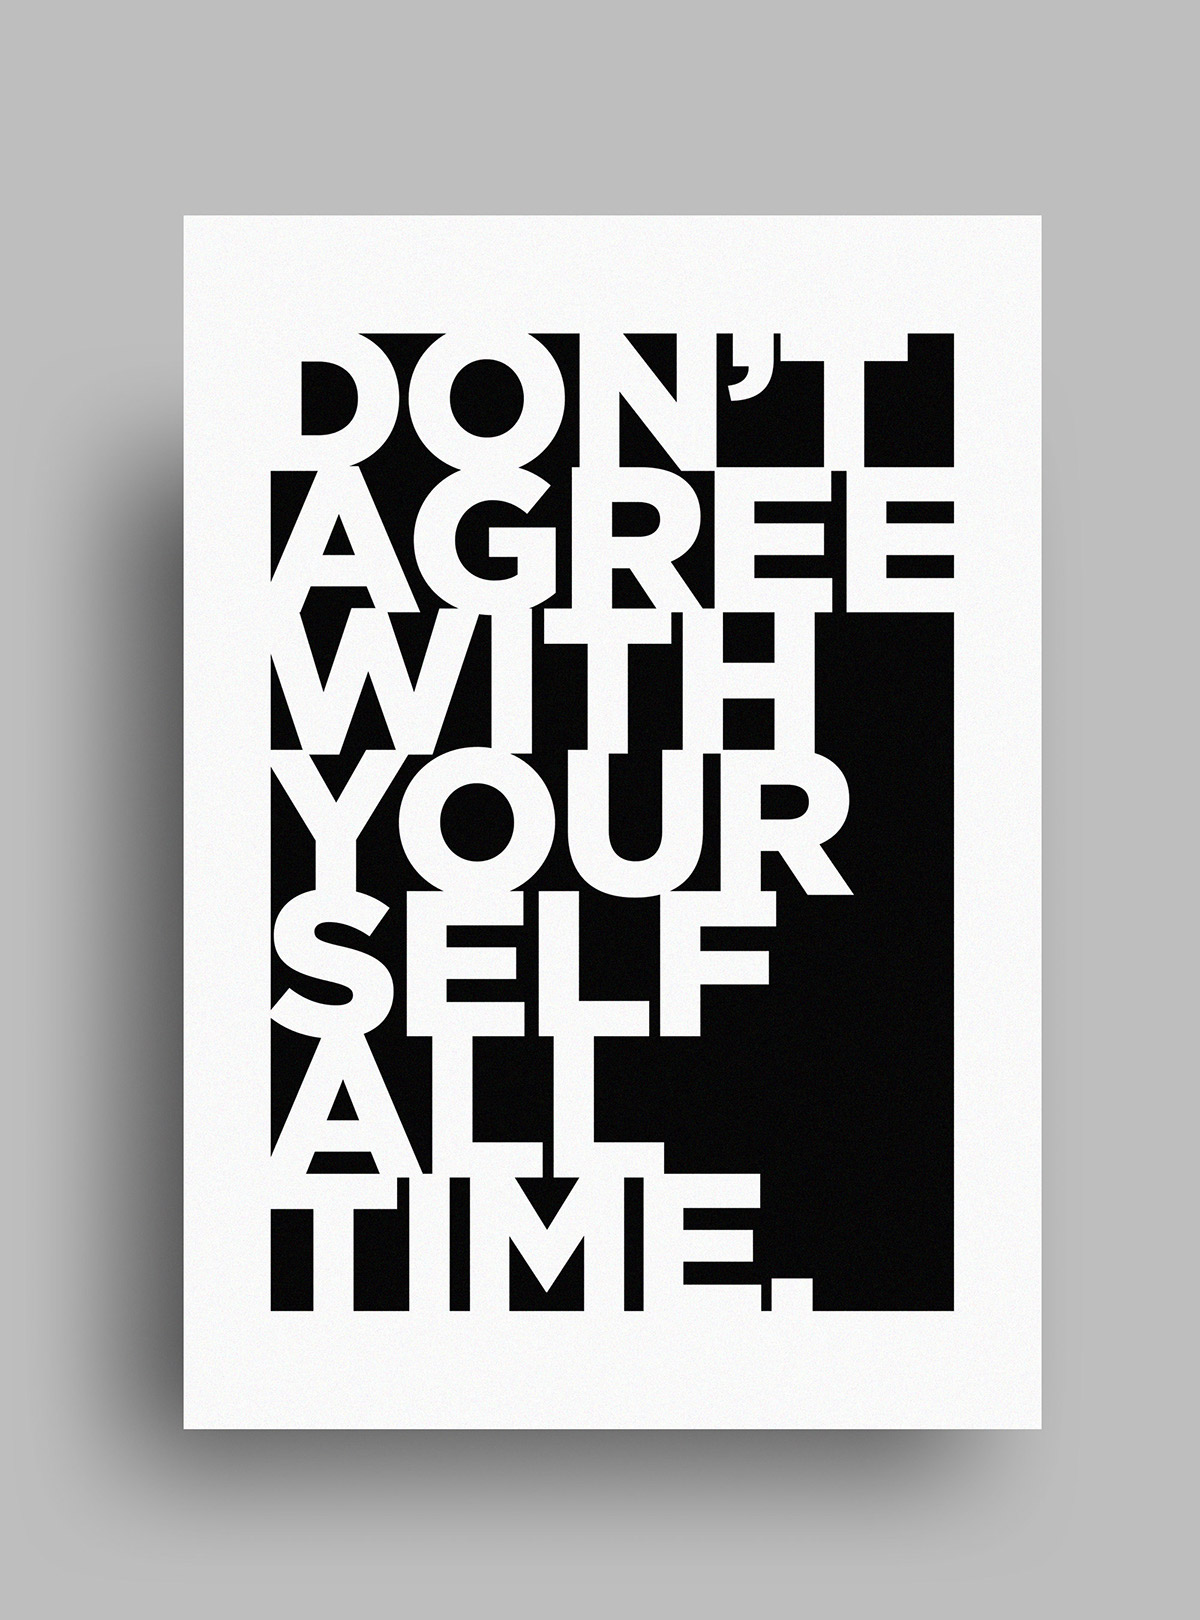 minimal typographic posters black ironic quote Layout White clean